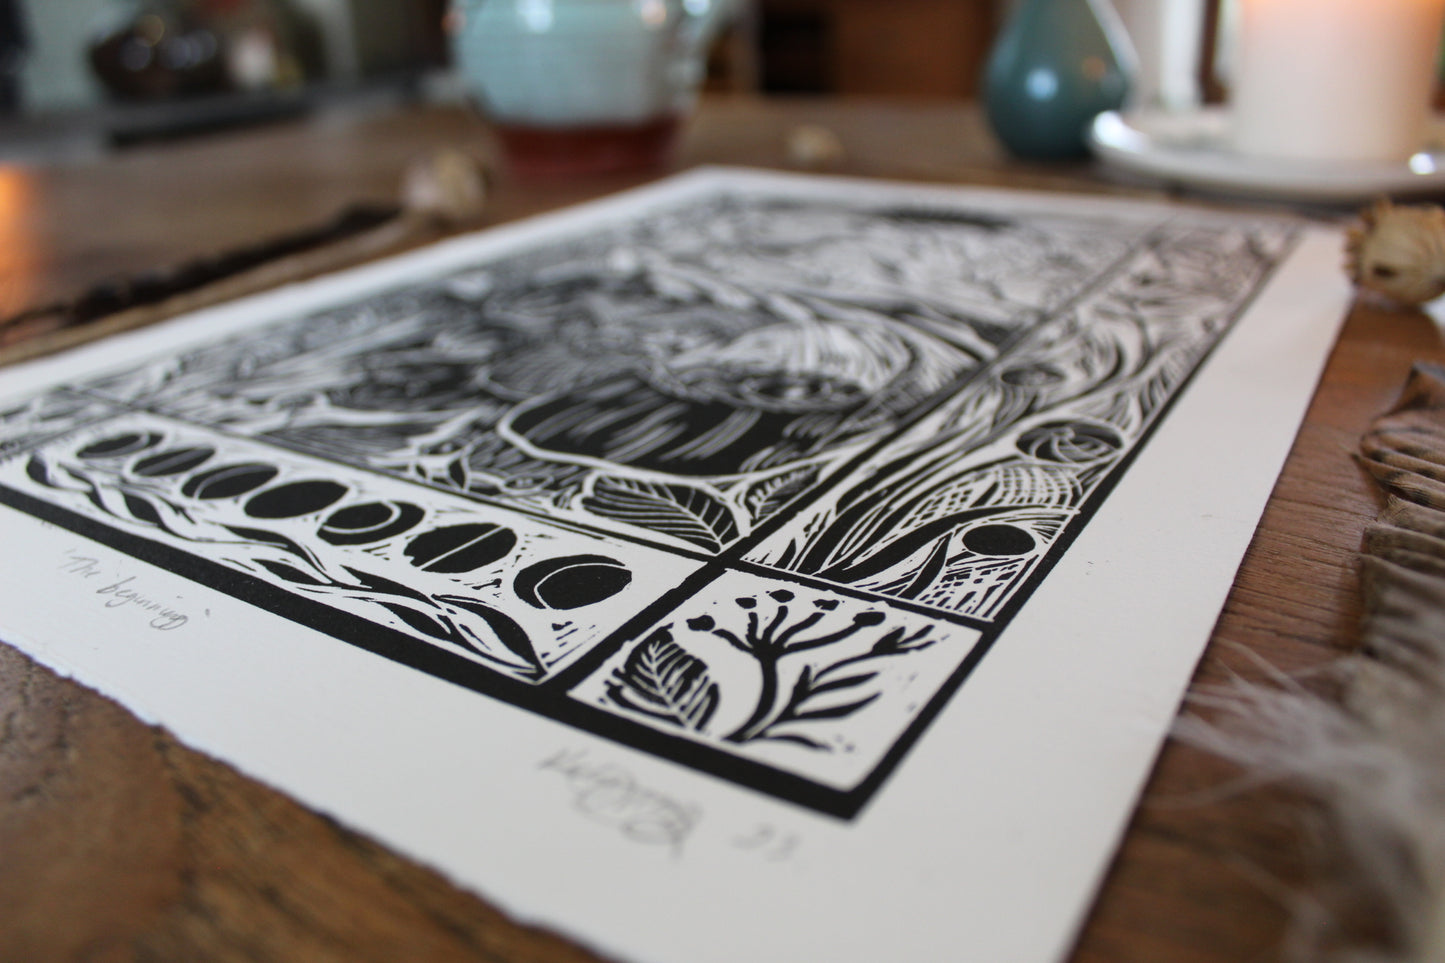 'The Beginning' Limited Edition Lino Print, Paper 35x25cm